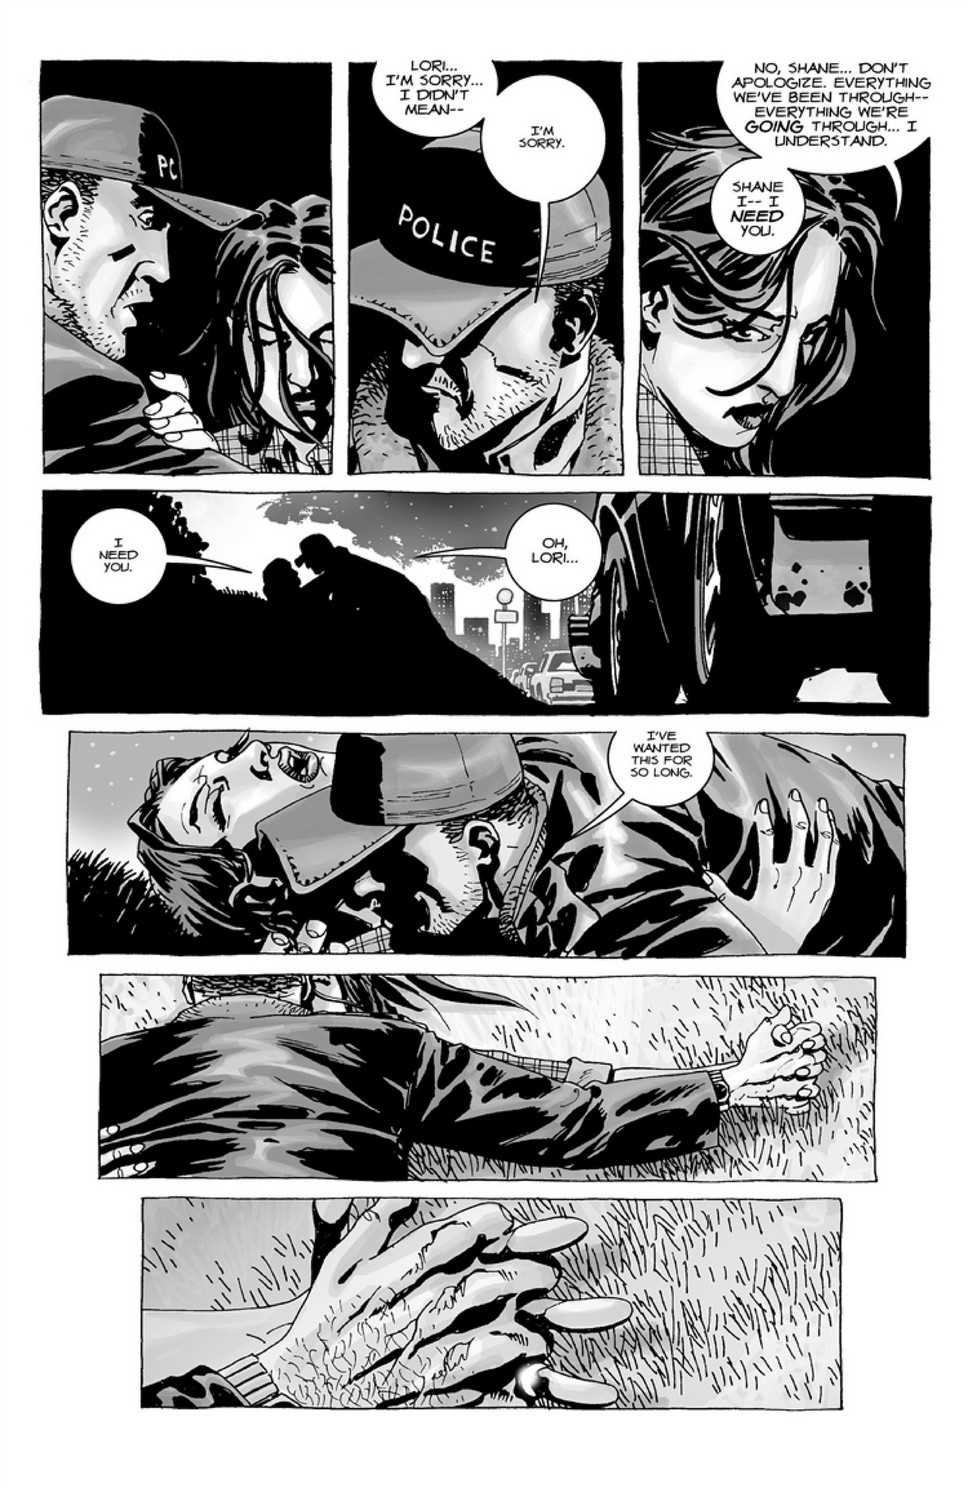 Imperialisme Dolke sidde My publications - The Walking Dead Volume 2 - Page 7 - Created with  Publitas.com